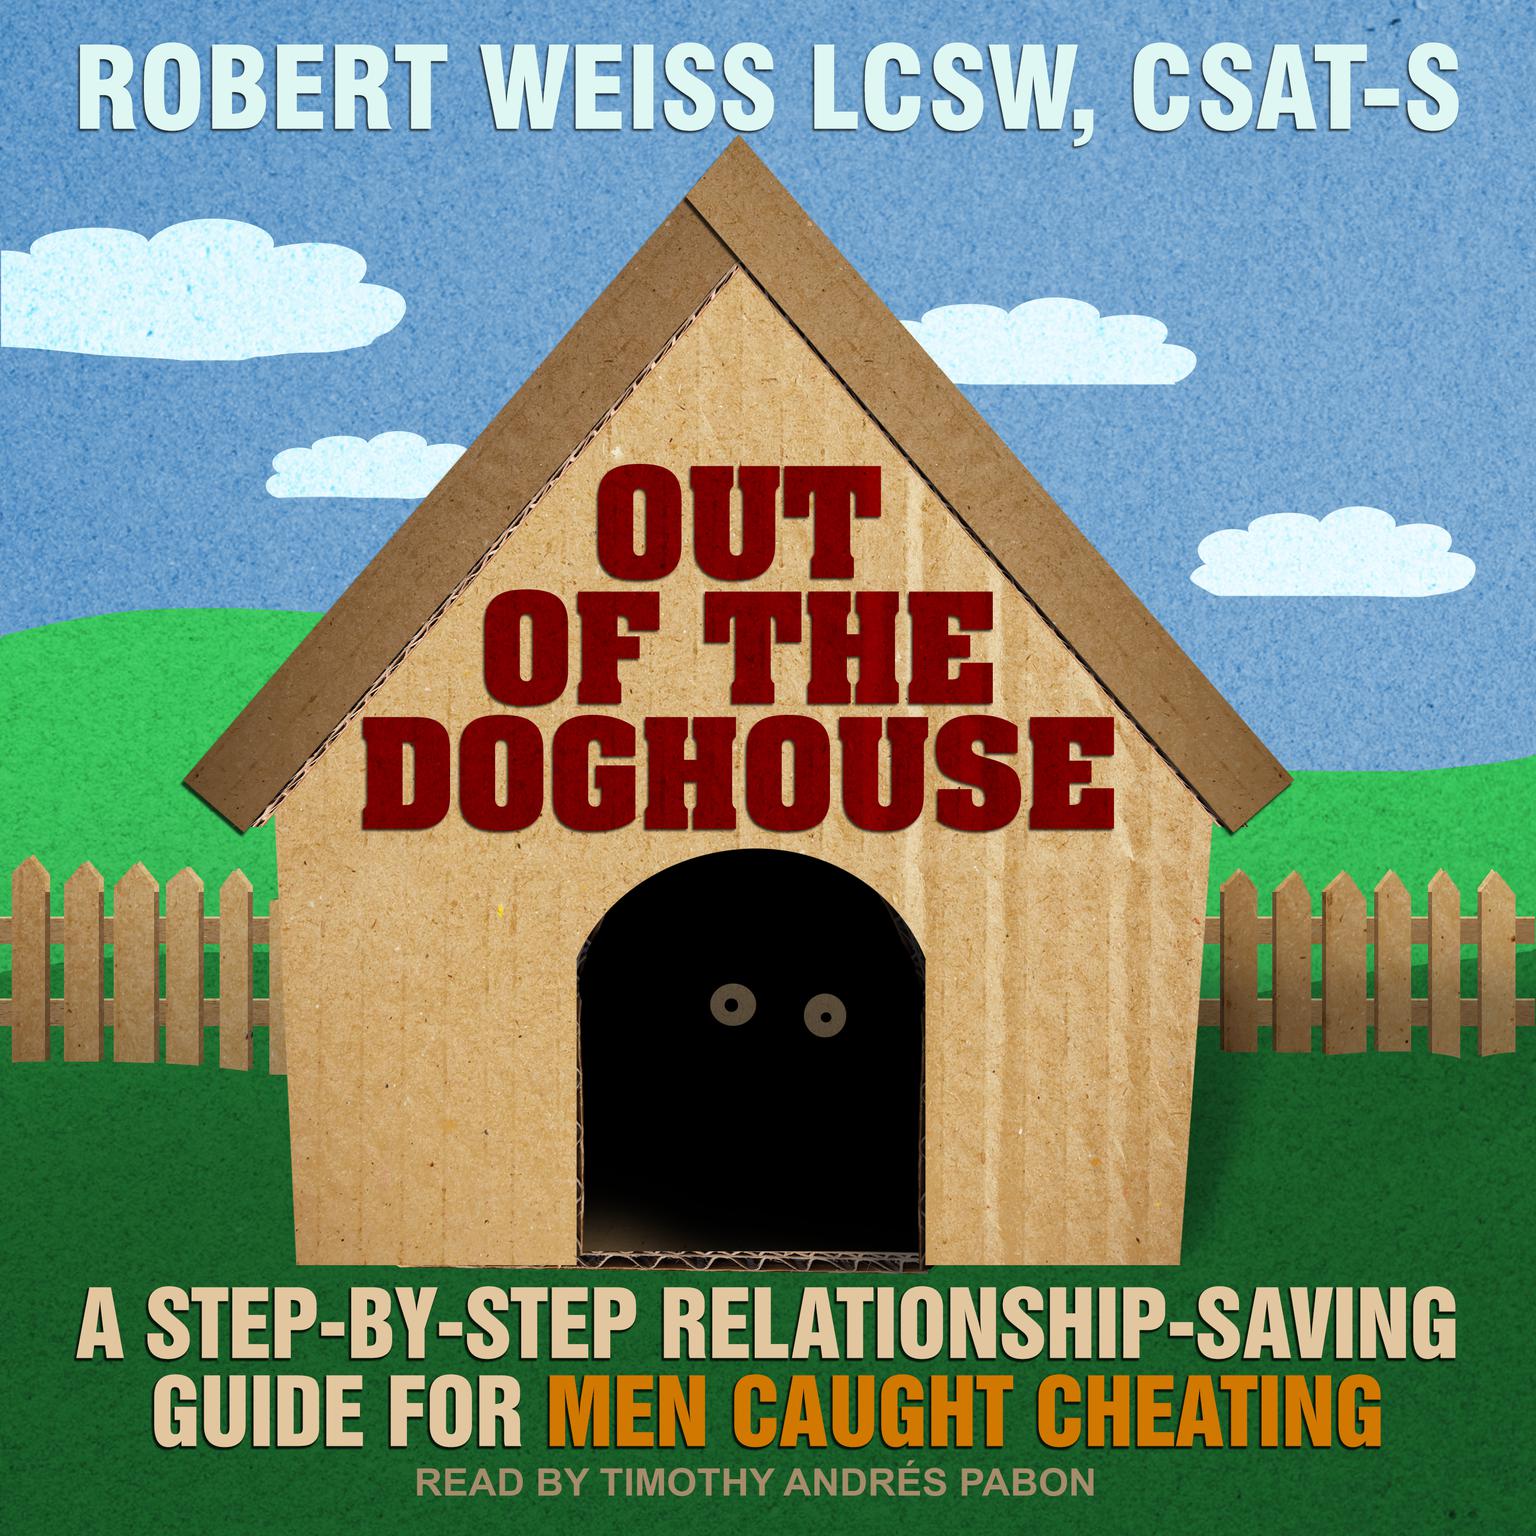 Out of the Doghouse: A Step-by-step Relationship-saving Guide for Men Caught Cheating Audiobook, by Robert Weiss